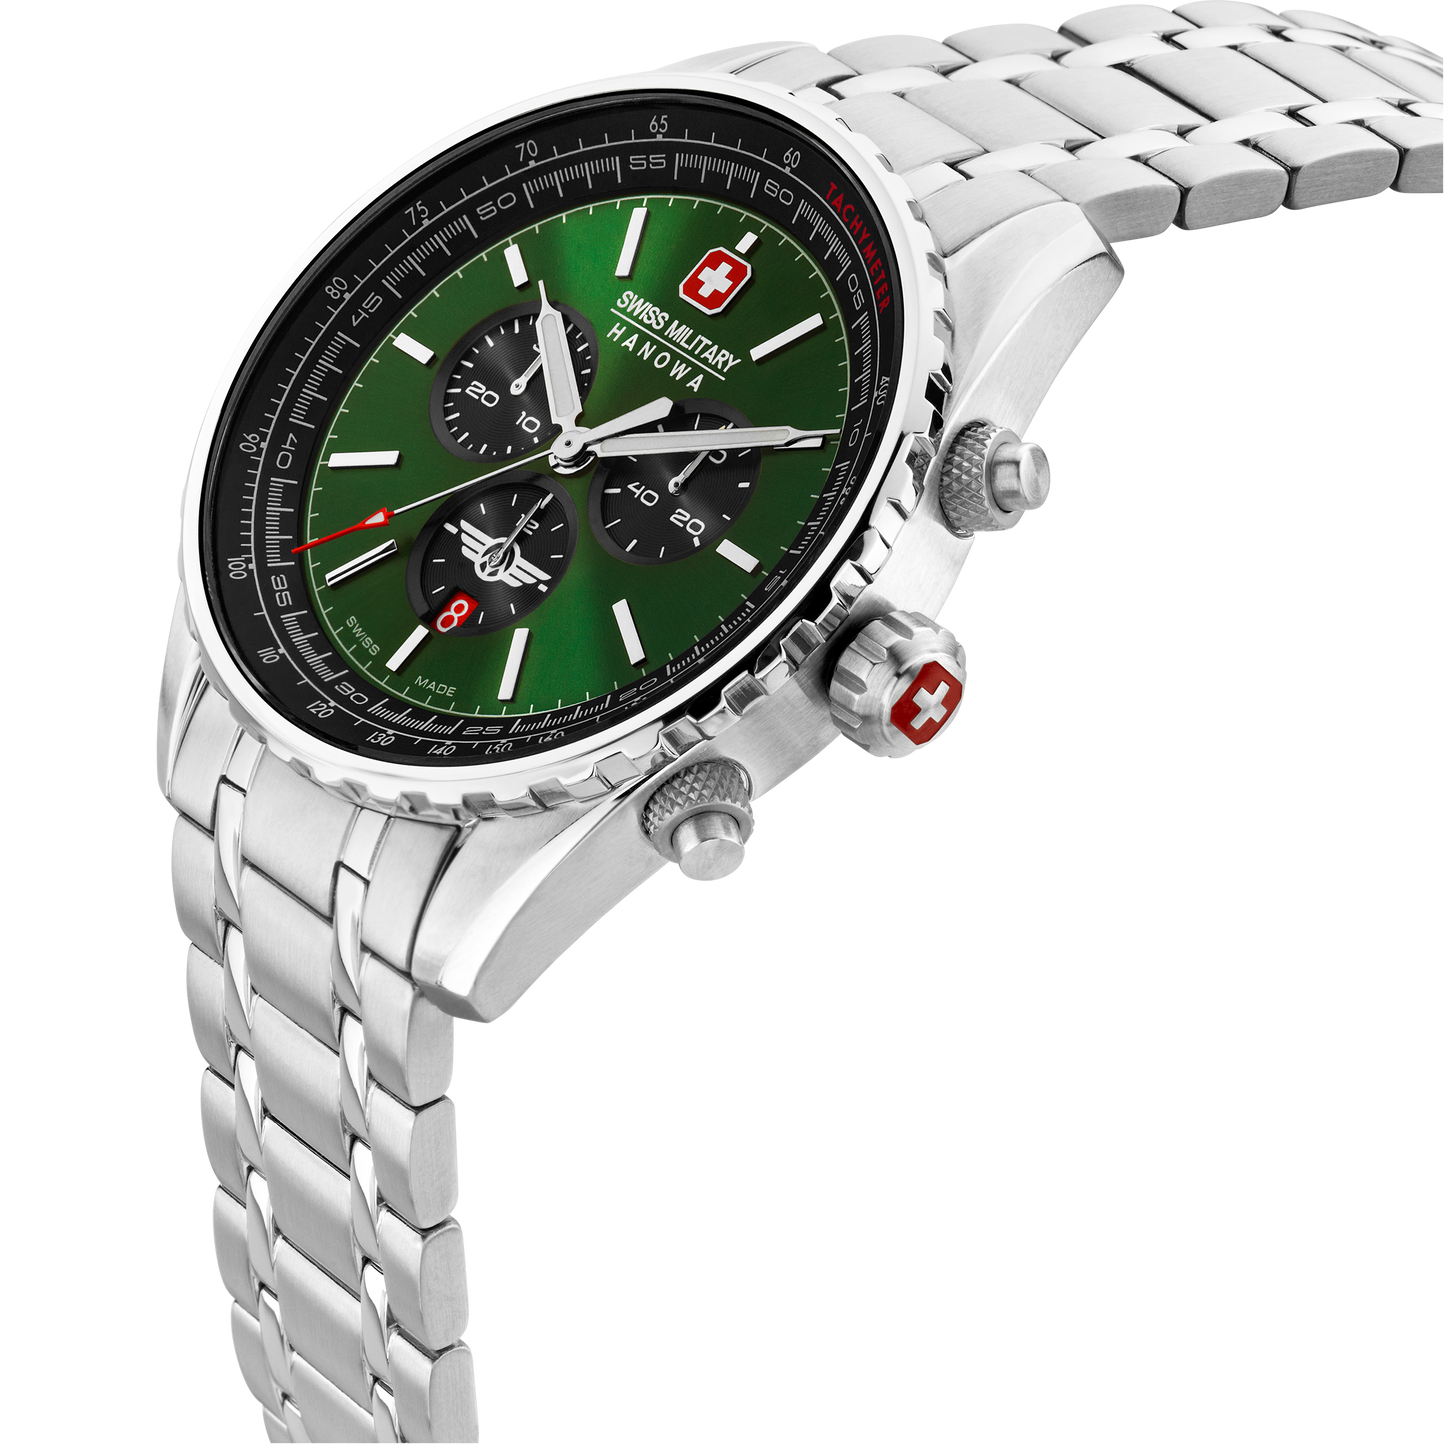 Swiss Military Hanowa Afterburn Chrono. Stainless steel case. Green dial, Stainless steel bracelet.